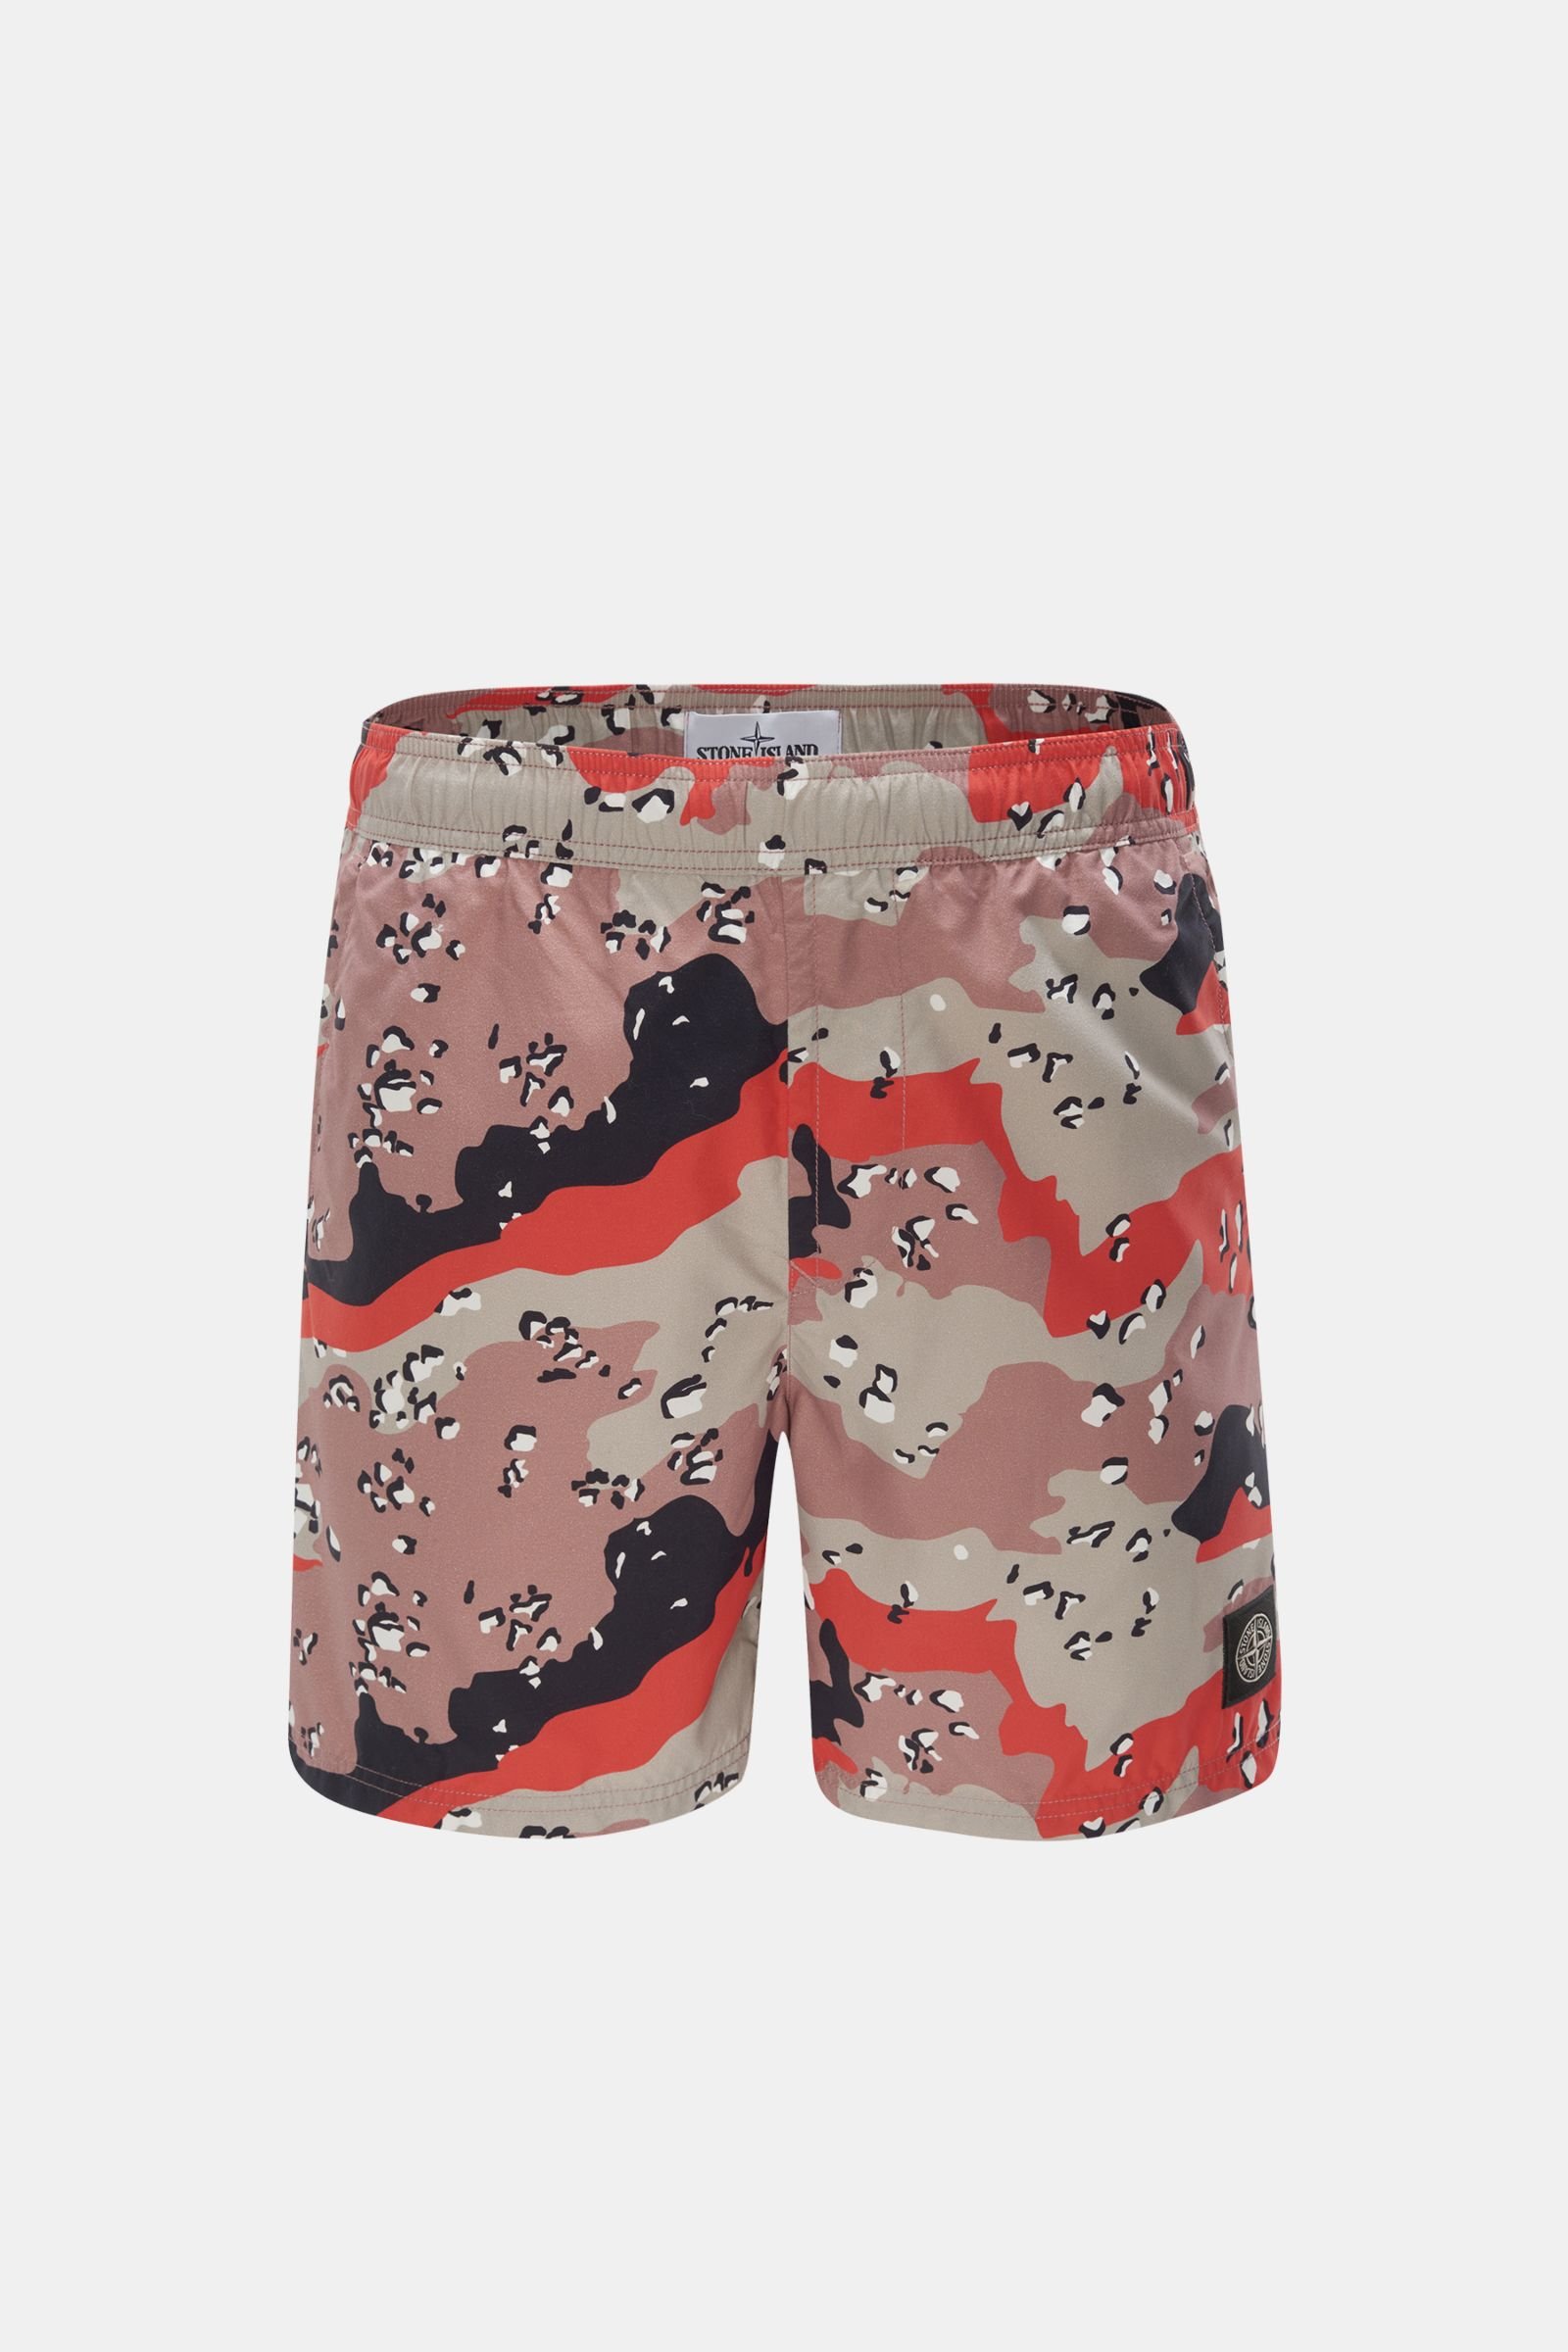 Swim shorts antique pink/red patterned